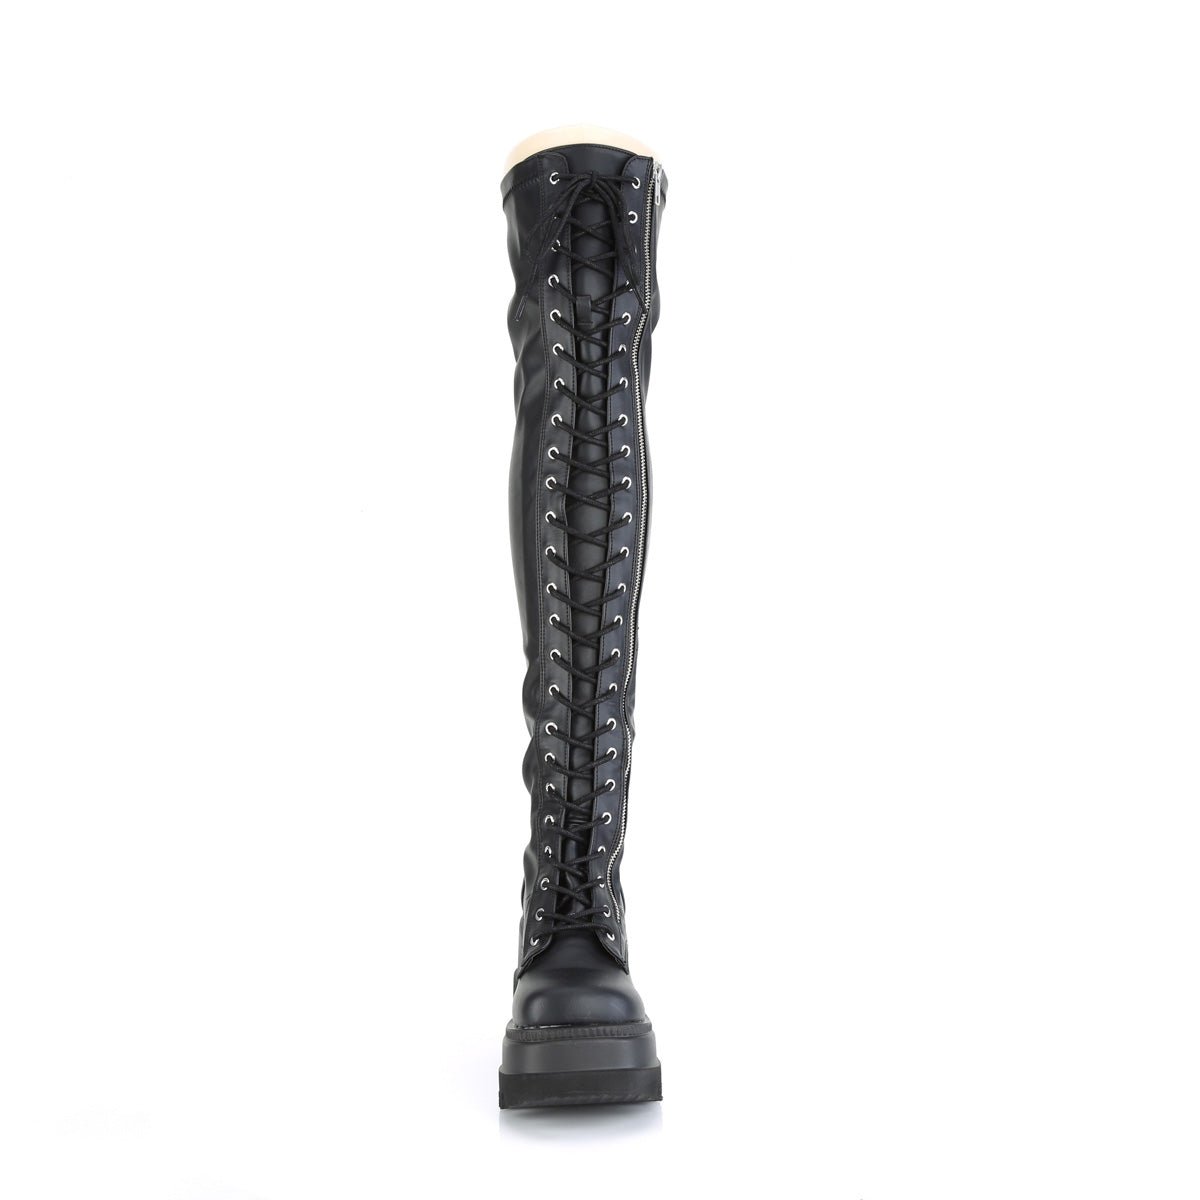 Too Fast | Demonia Shaker 374 | Black Stetch Vegan Leather Women's Over The Knee Boots